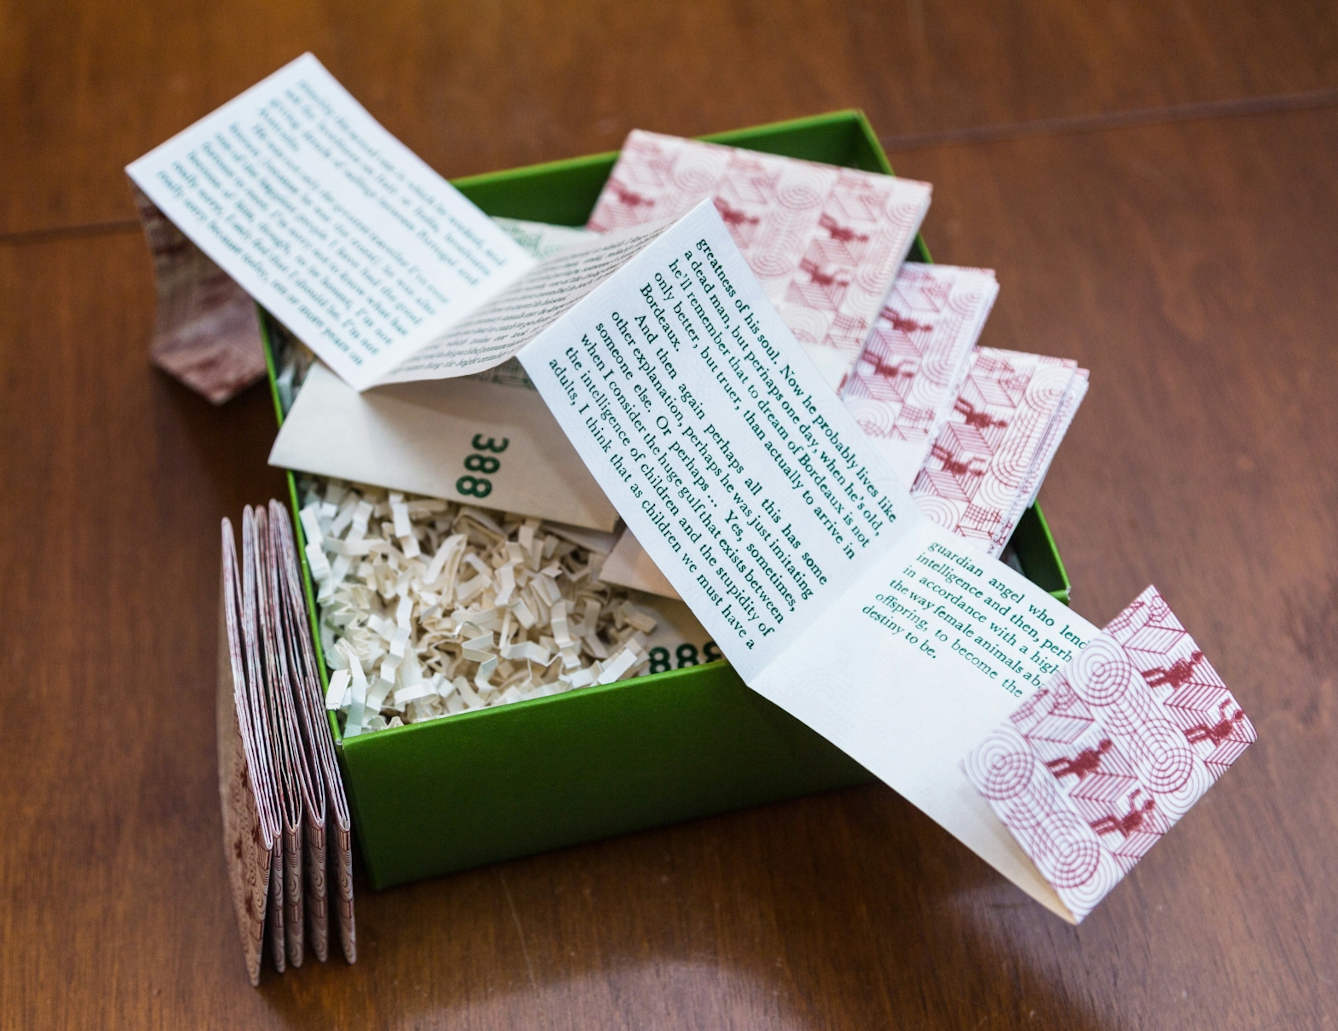 An unfolded, printed piece of card sits on top of a small, bright green box.